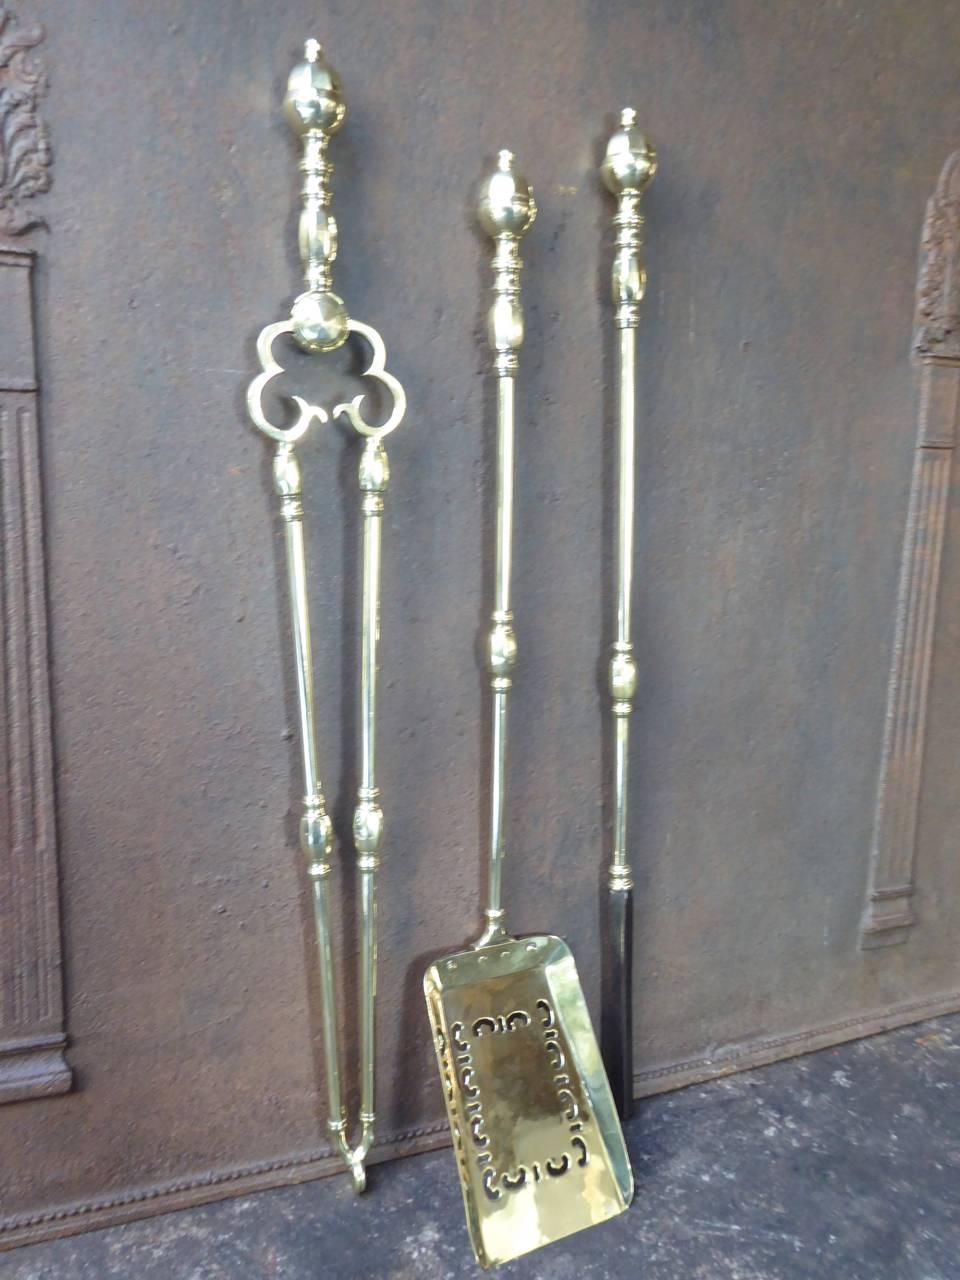 19th century English fireplace tool set made of polished brass and polished steel.